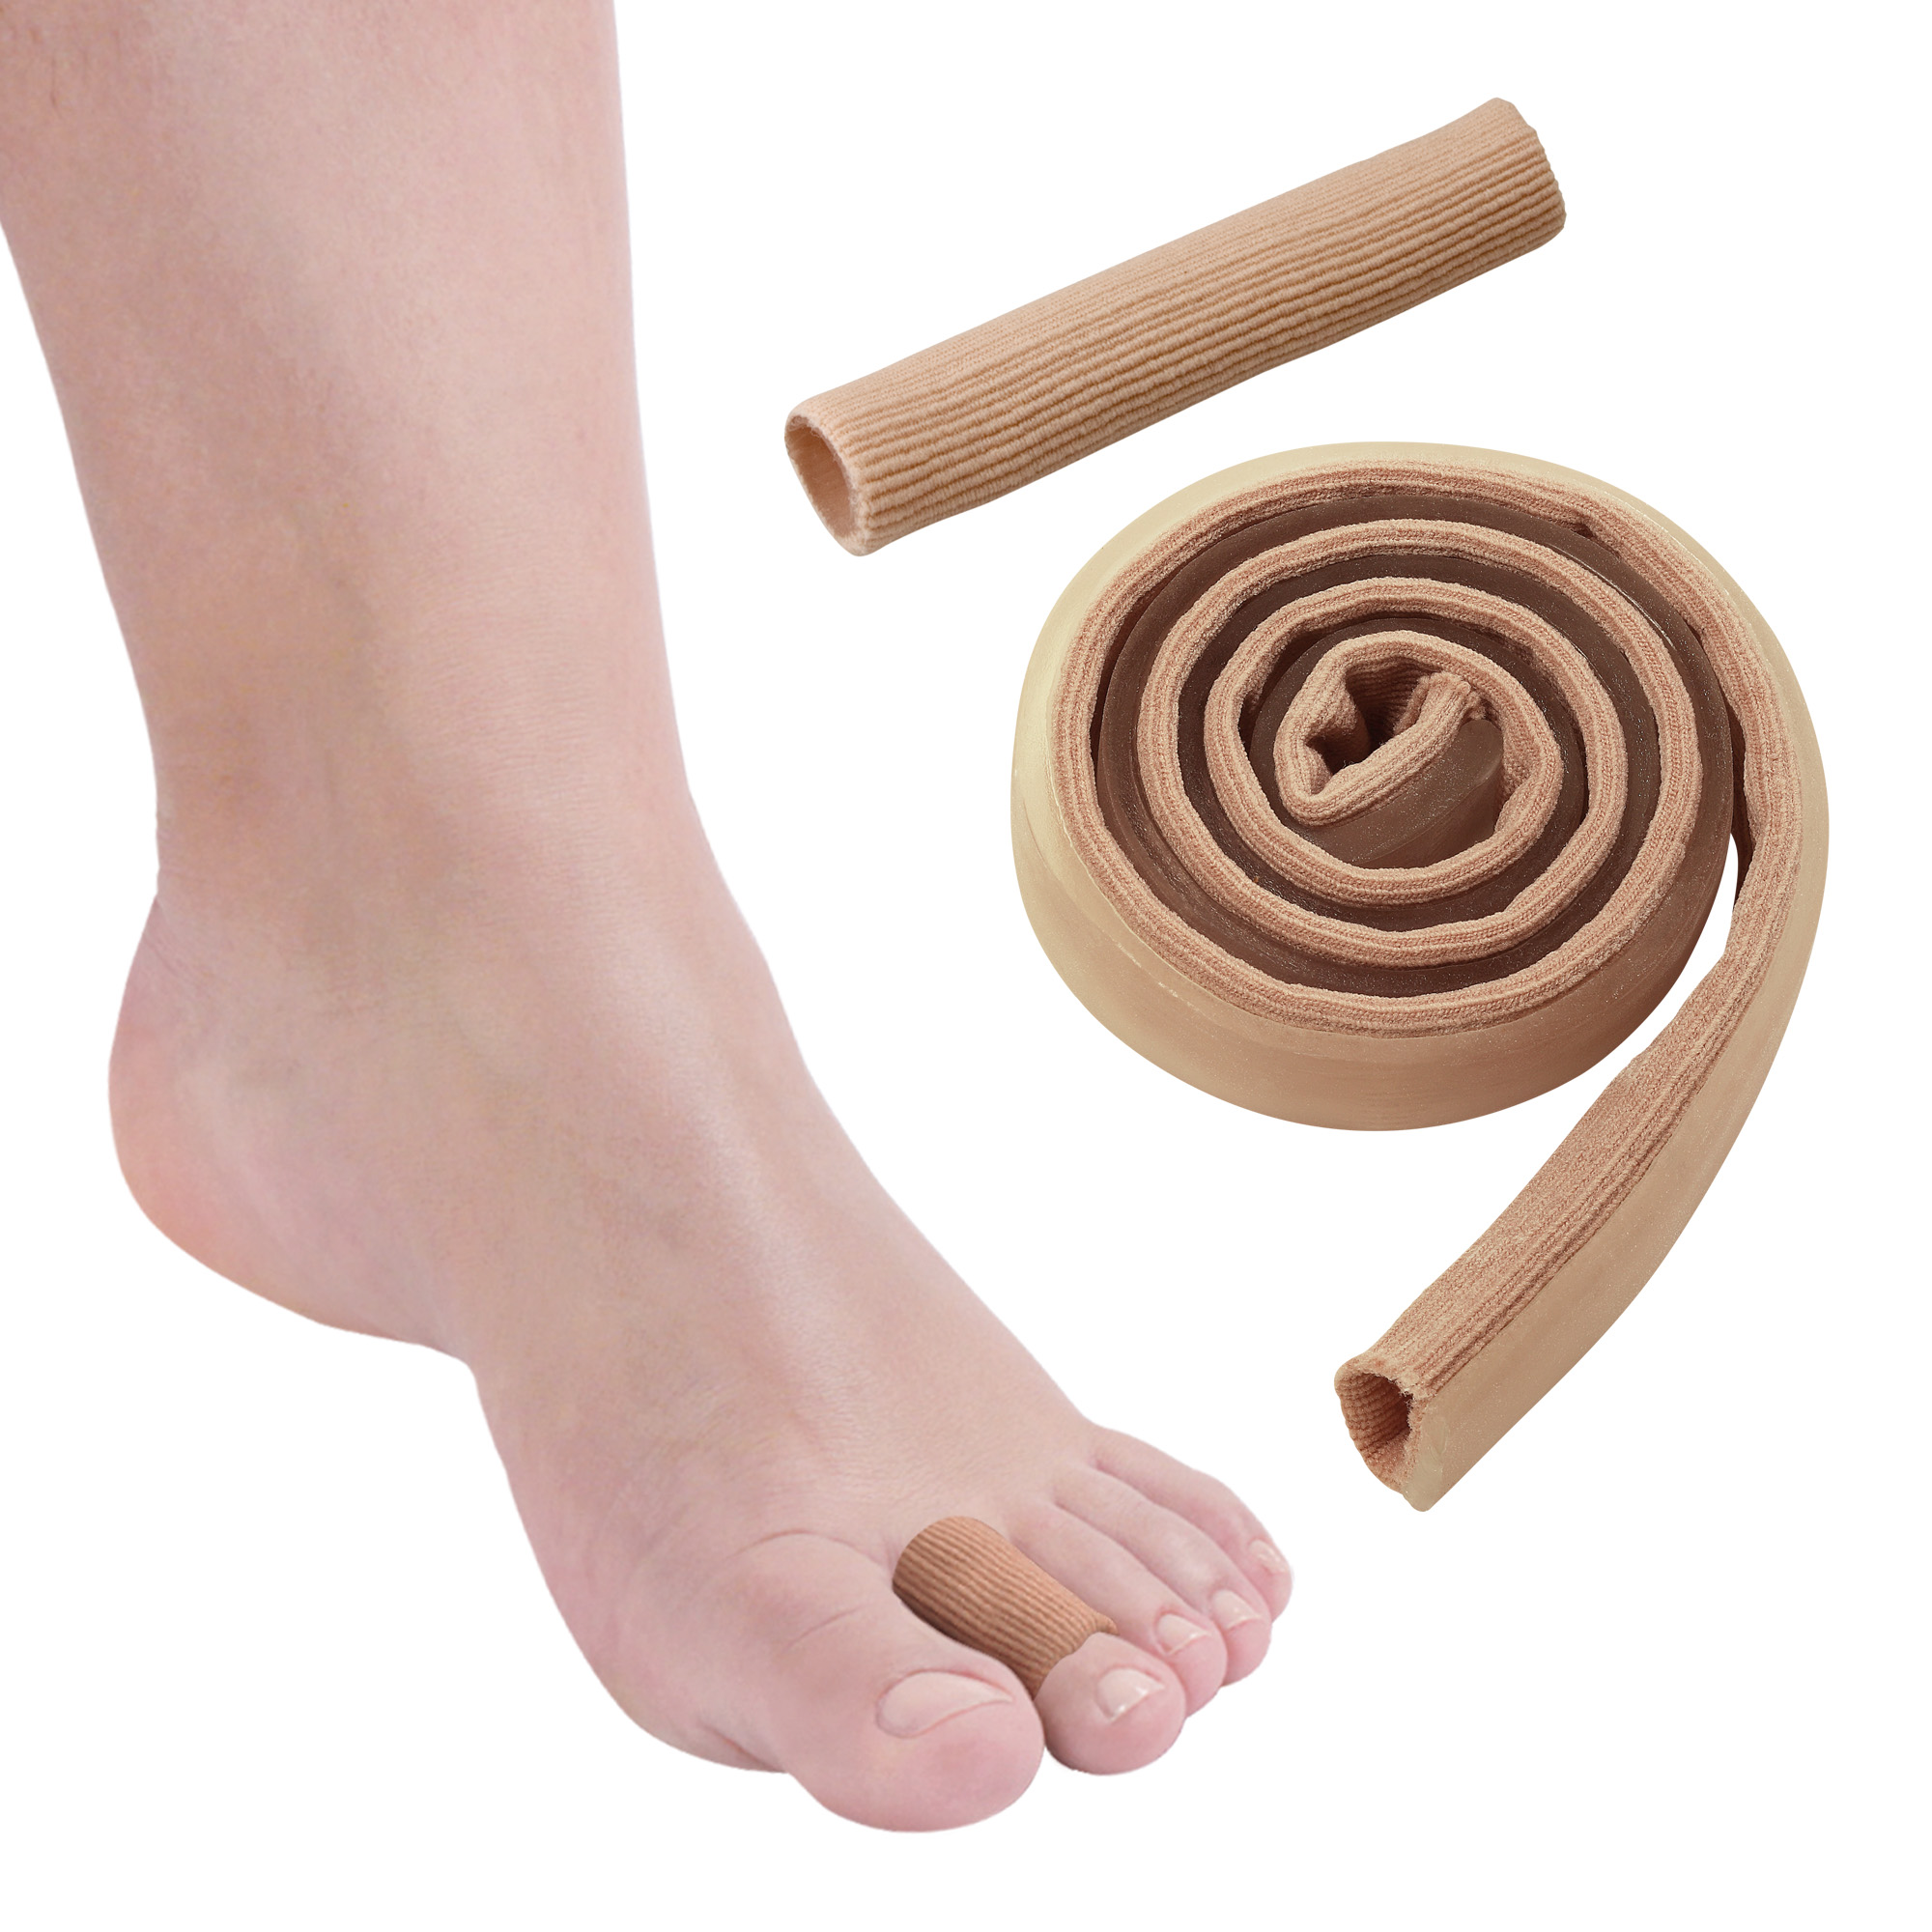 Fabric toe protector with Tecniwork Polymer Gel central pad